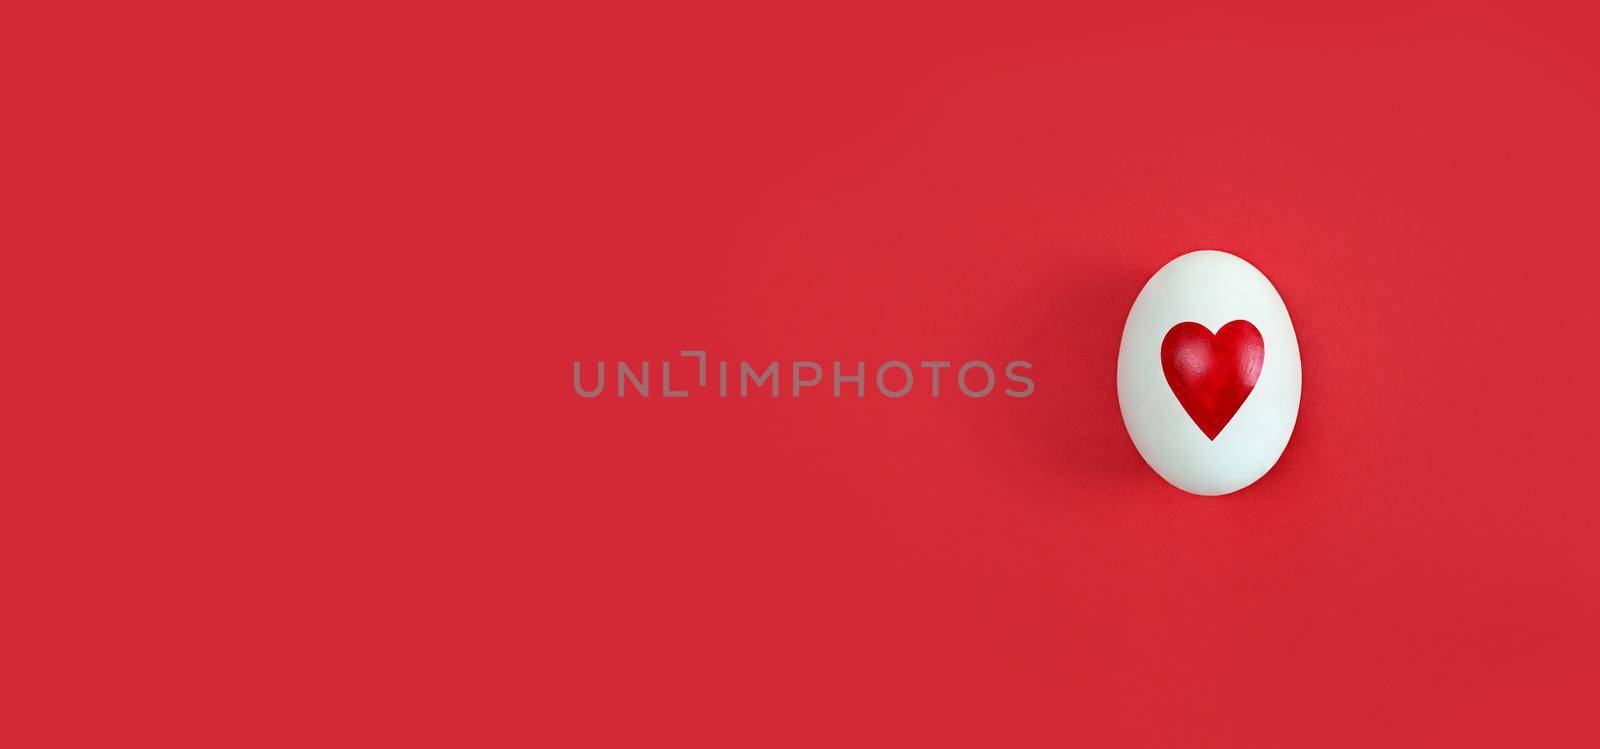 White egg with heart shape on a red background with copy space.